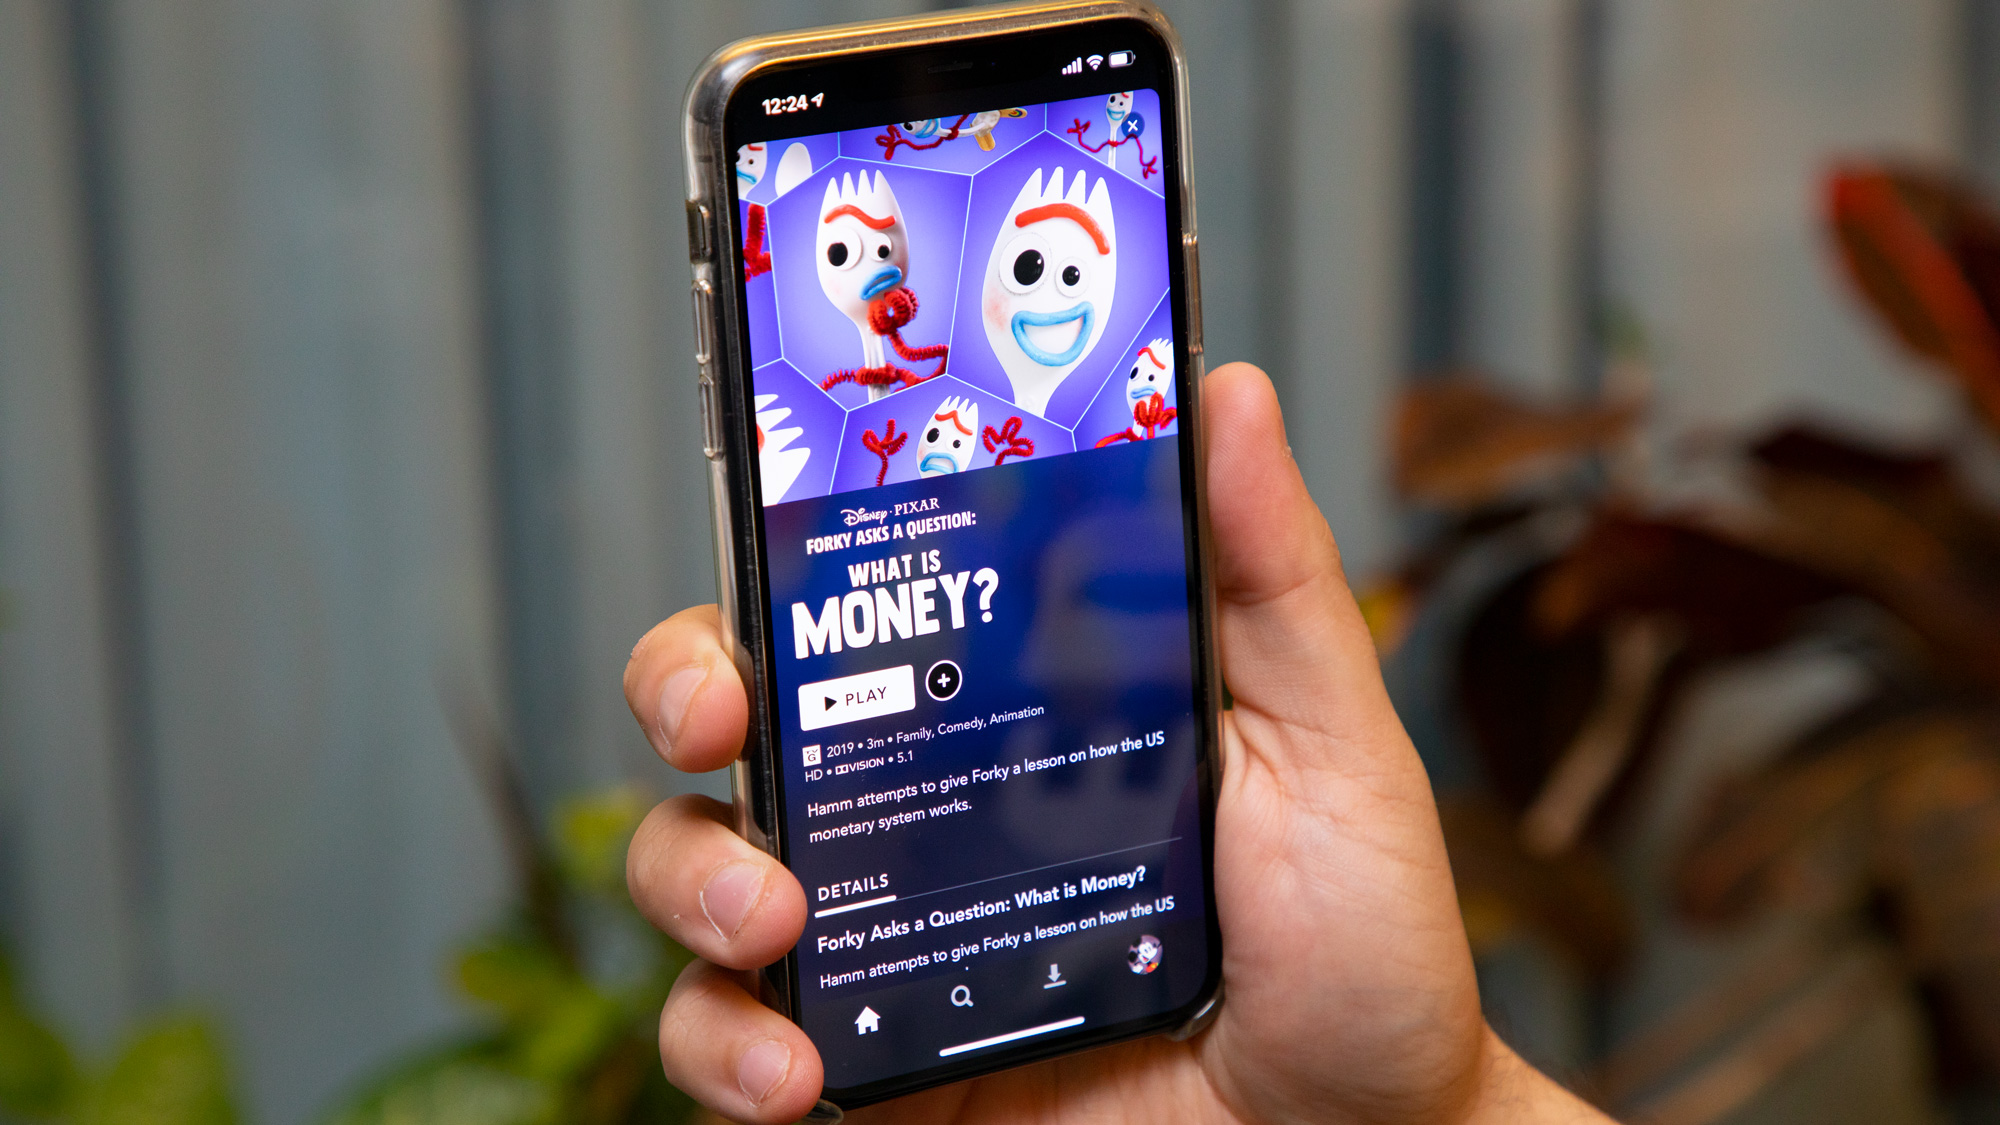 The Disney Plus app open to the show about Forky, the Toy Story character who learns lessons